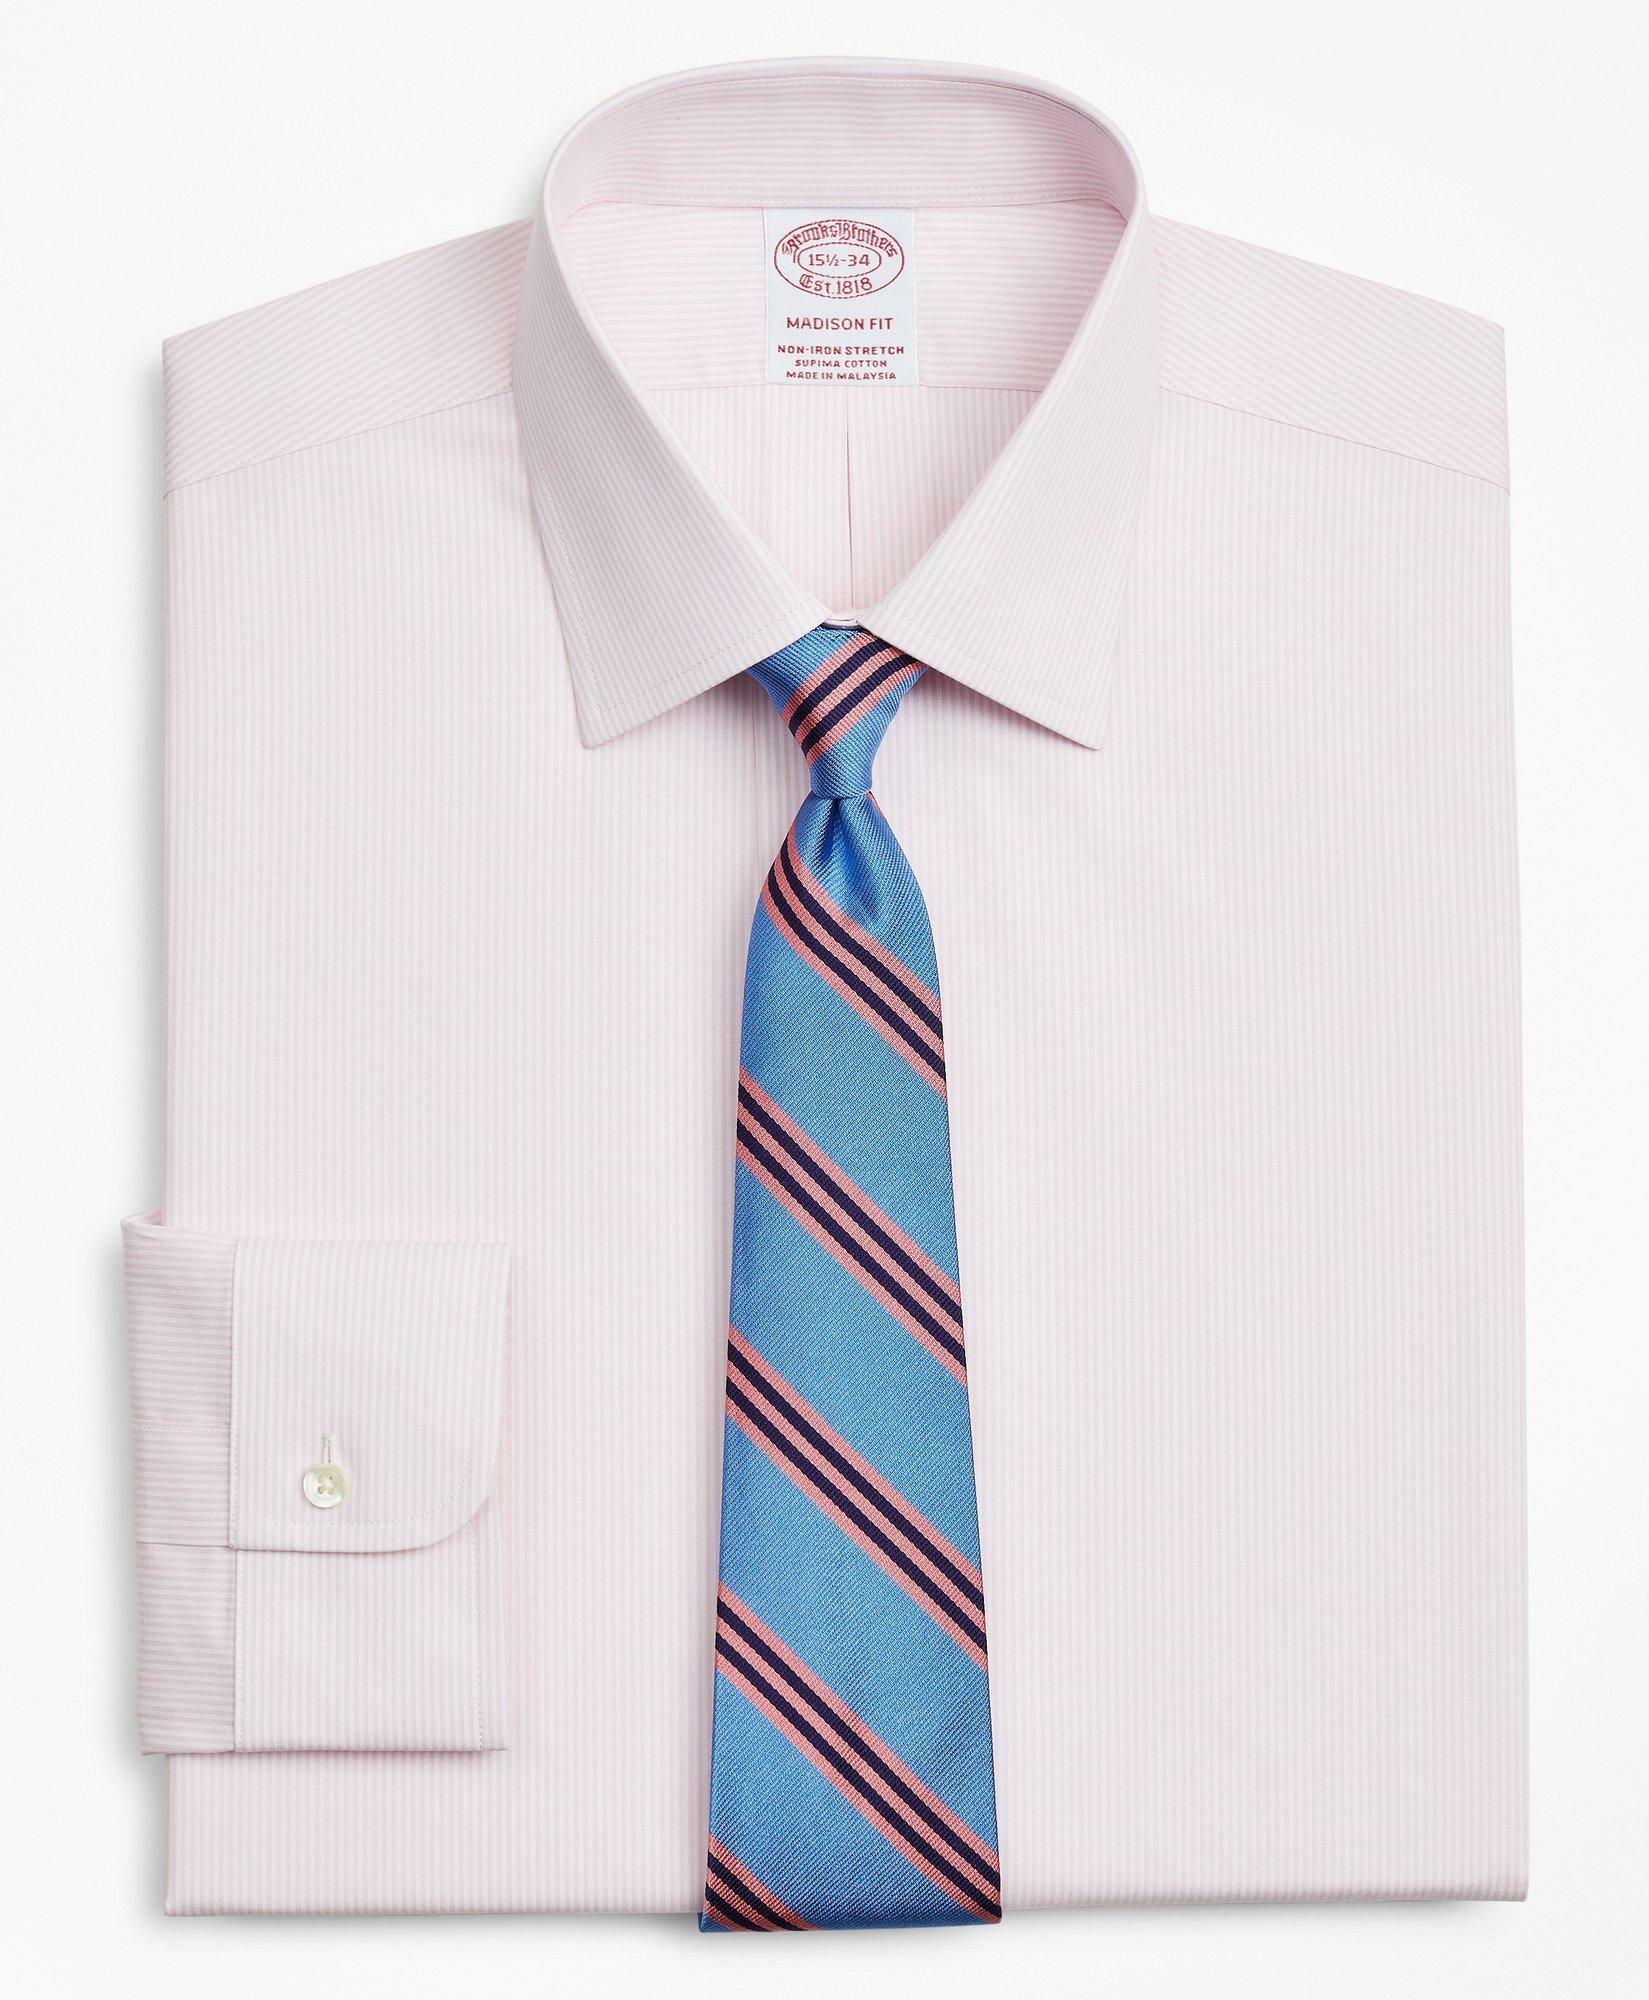 Brooks Brothers Men's Stretch Madison Relaxed-Fit Dress Shirt, Non-Iron Poplin Ainsley Collar Fine Stripe | Pink